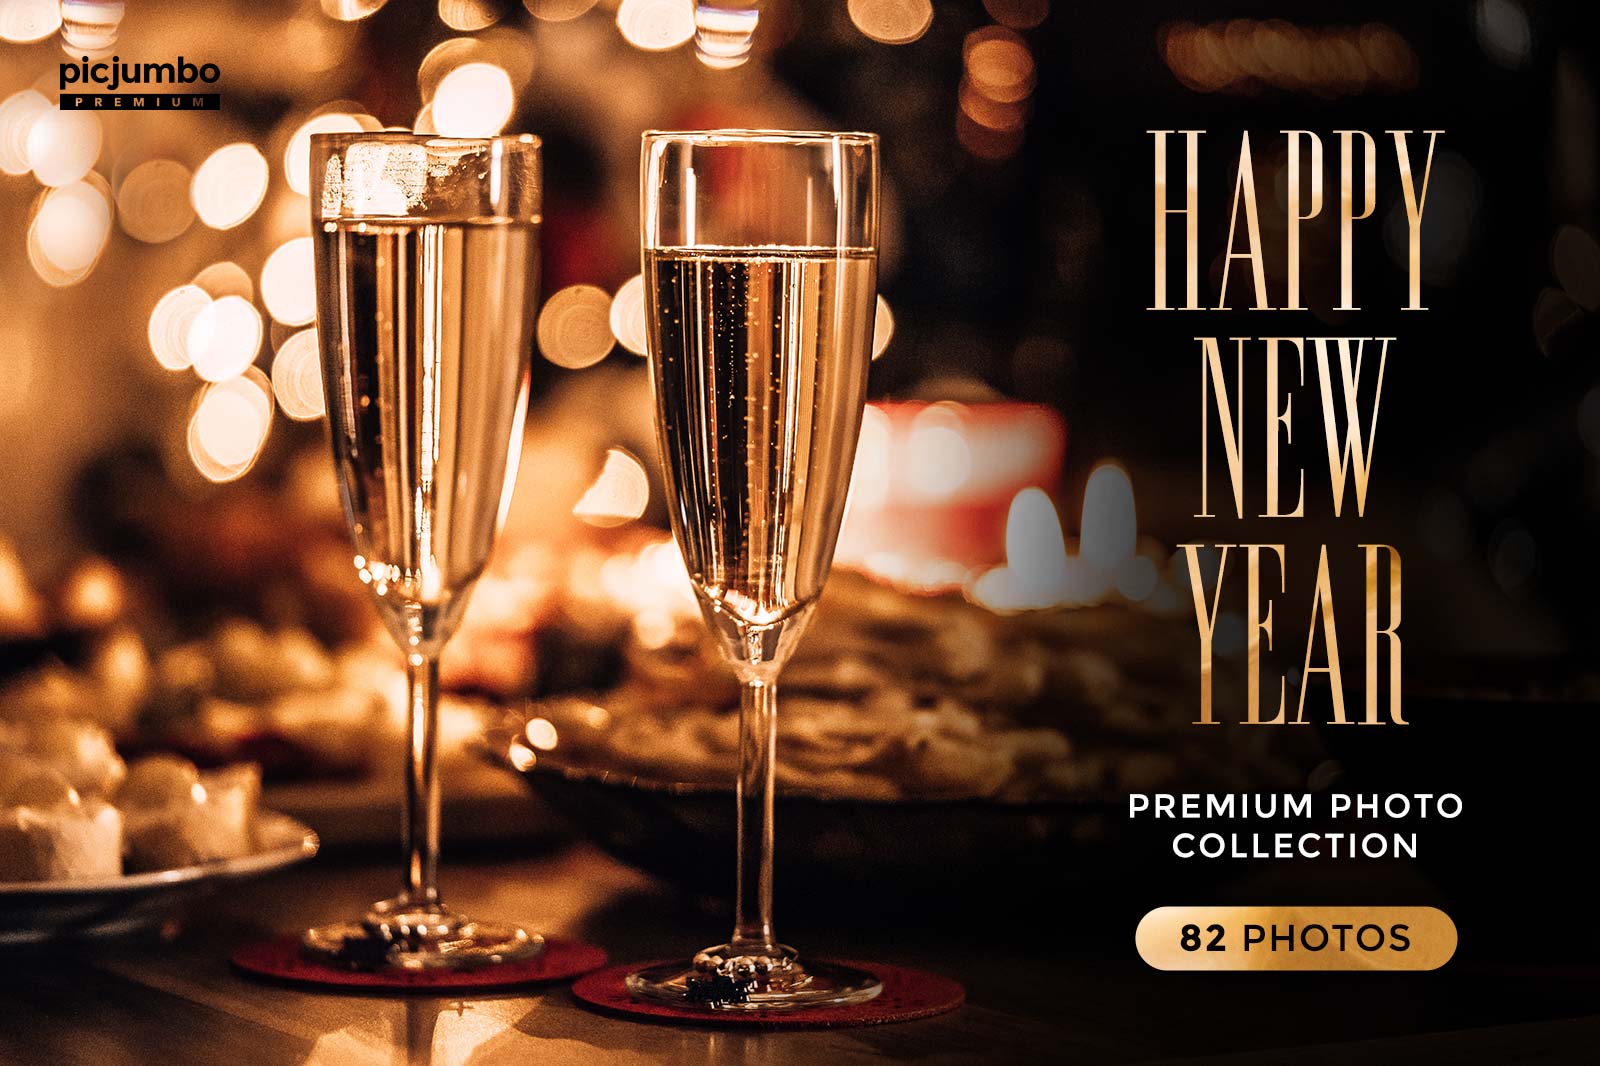 Download hi-res stock photos from our Happy New Year PREMIUM Collection!